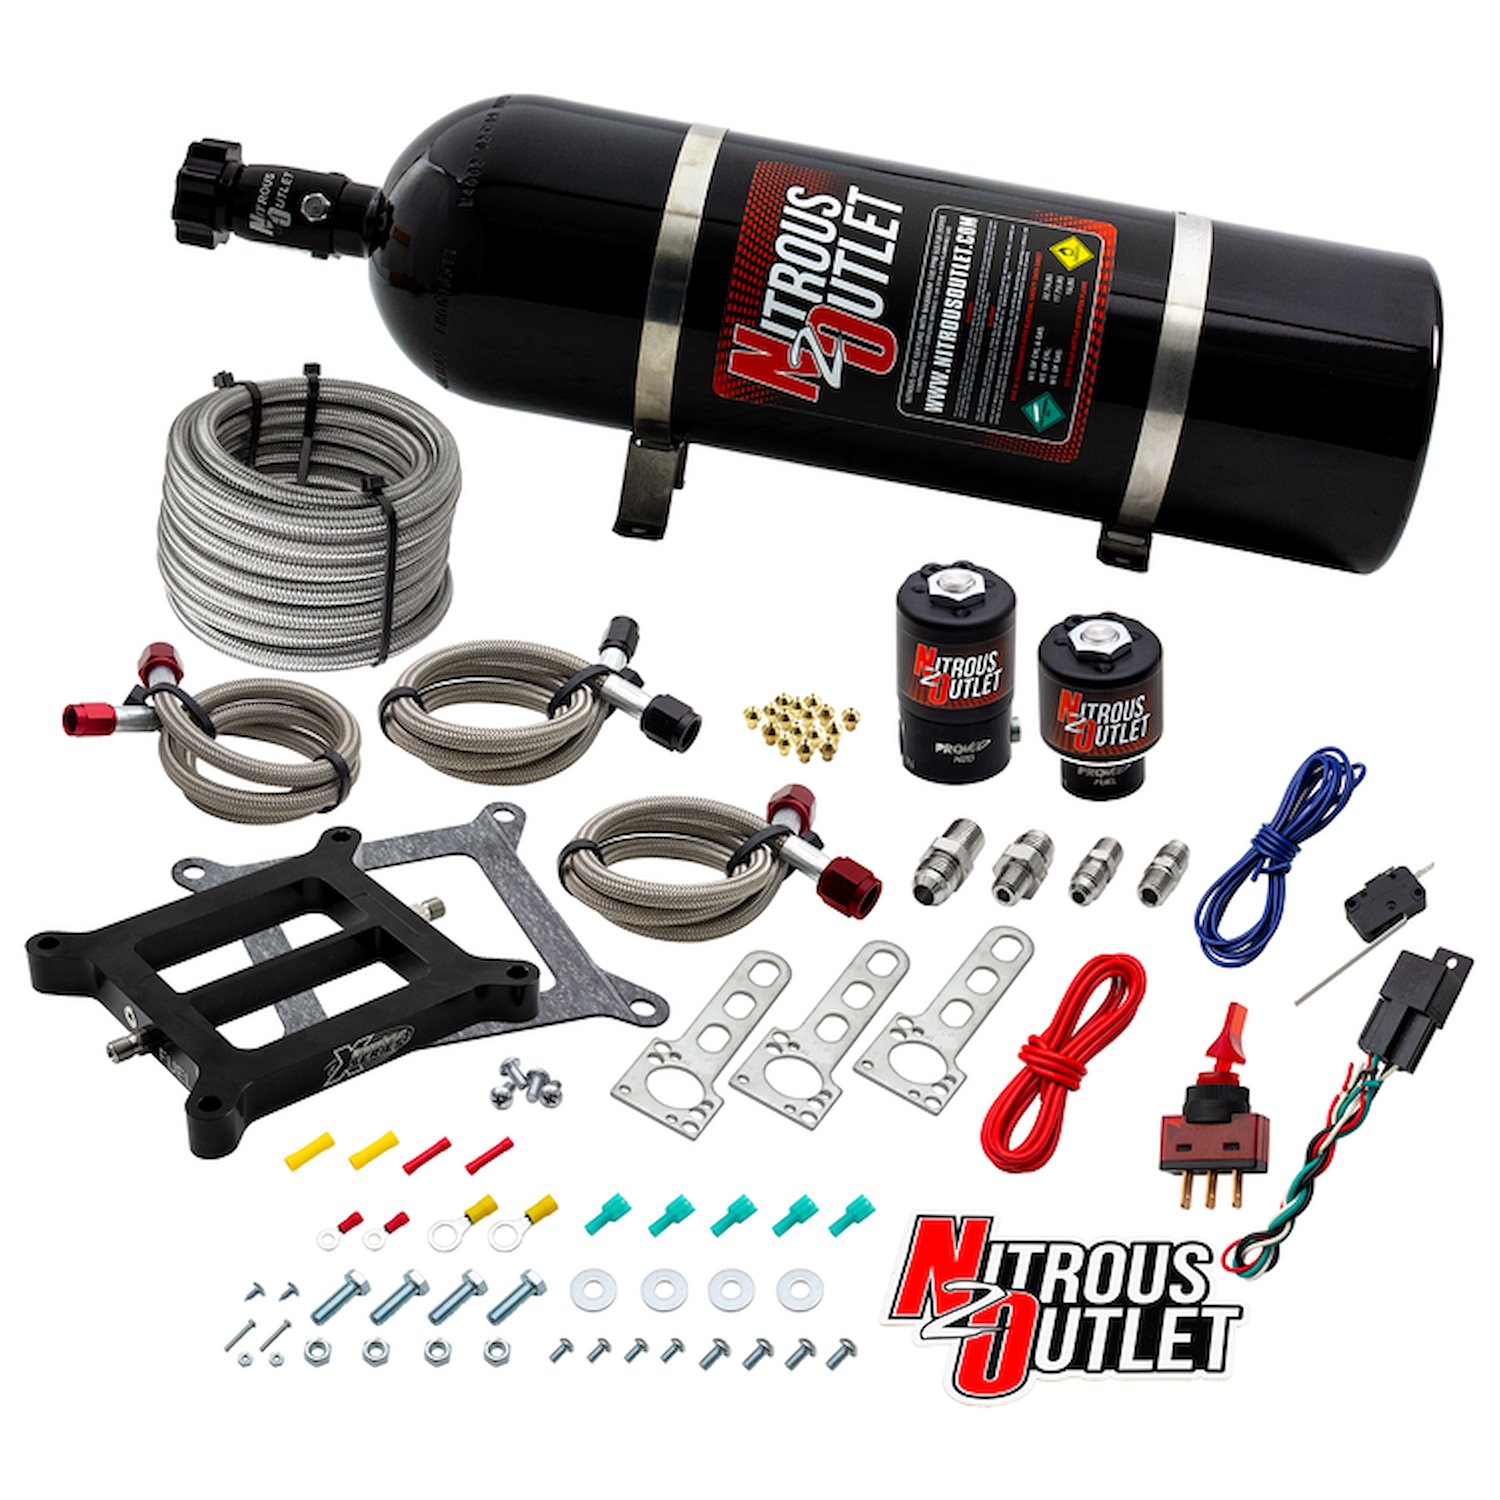 00-10070-15 Weekend Warrior 4150 Plate System, Gas/E85, 5-55psi, 100-350 HP, 15LB Bottle